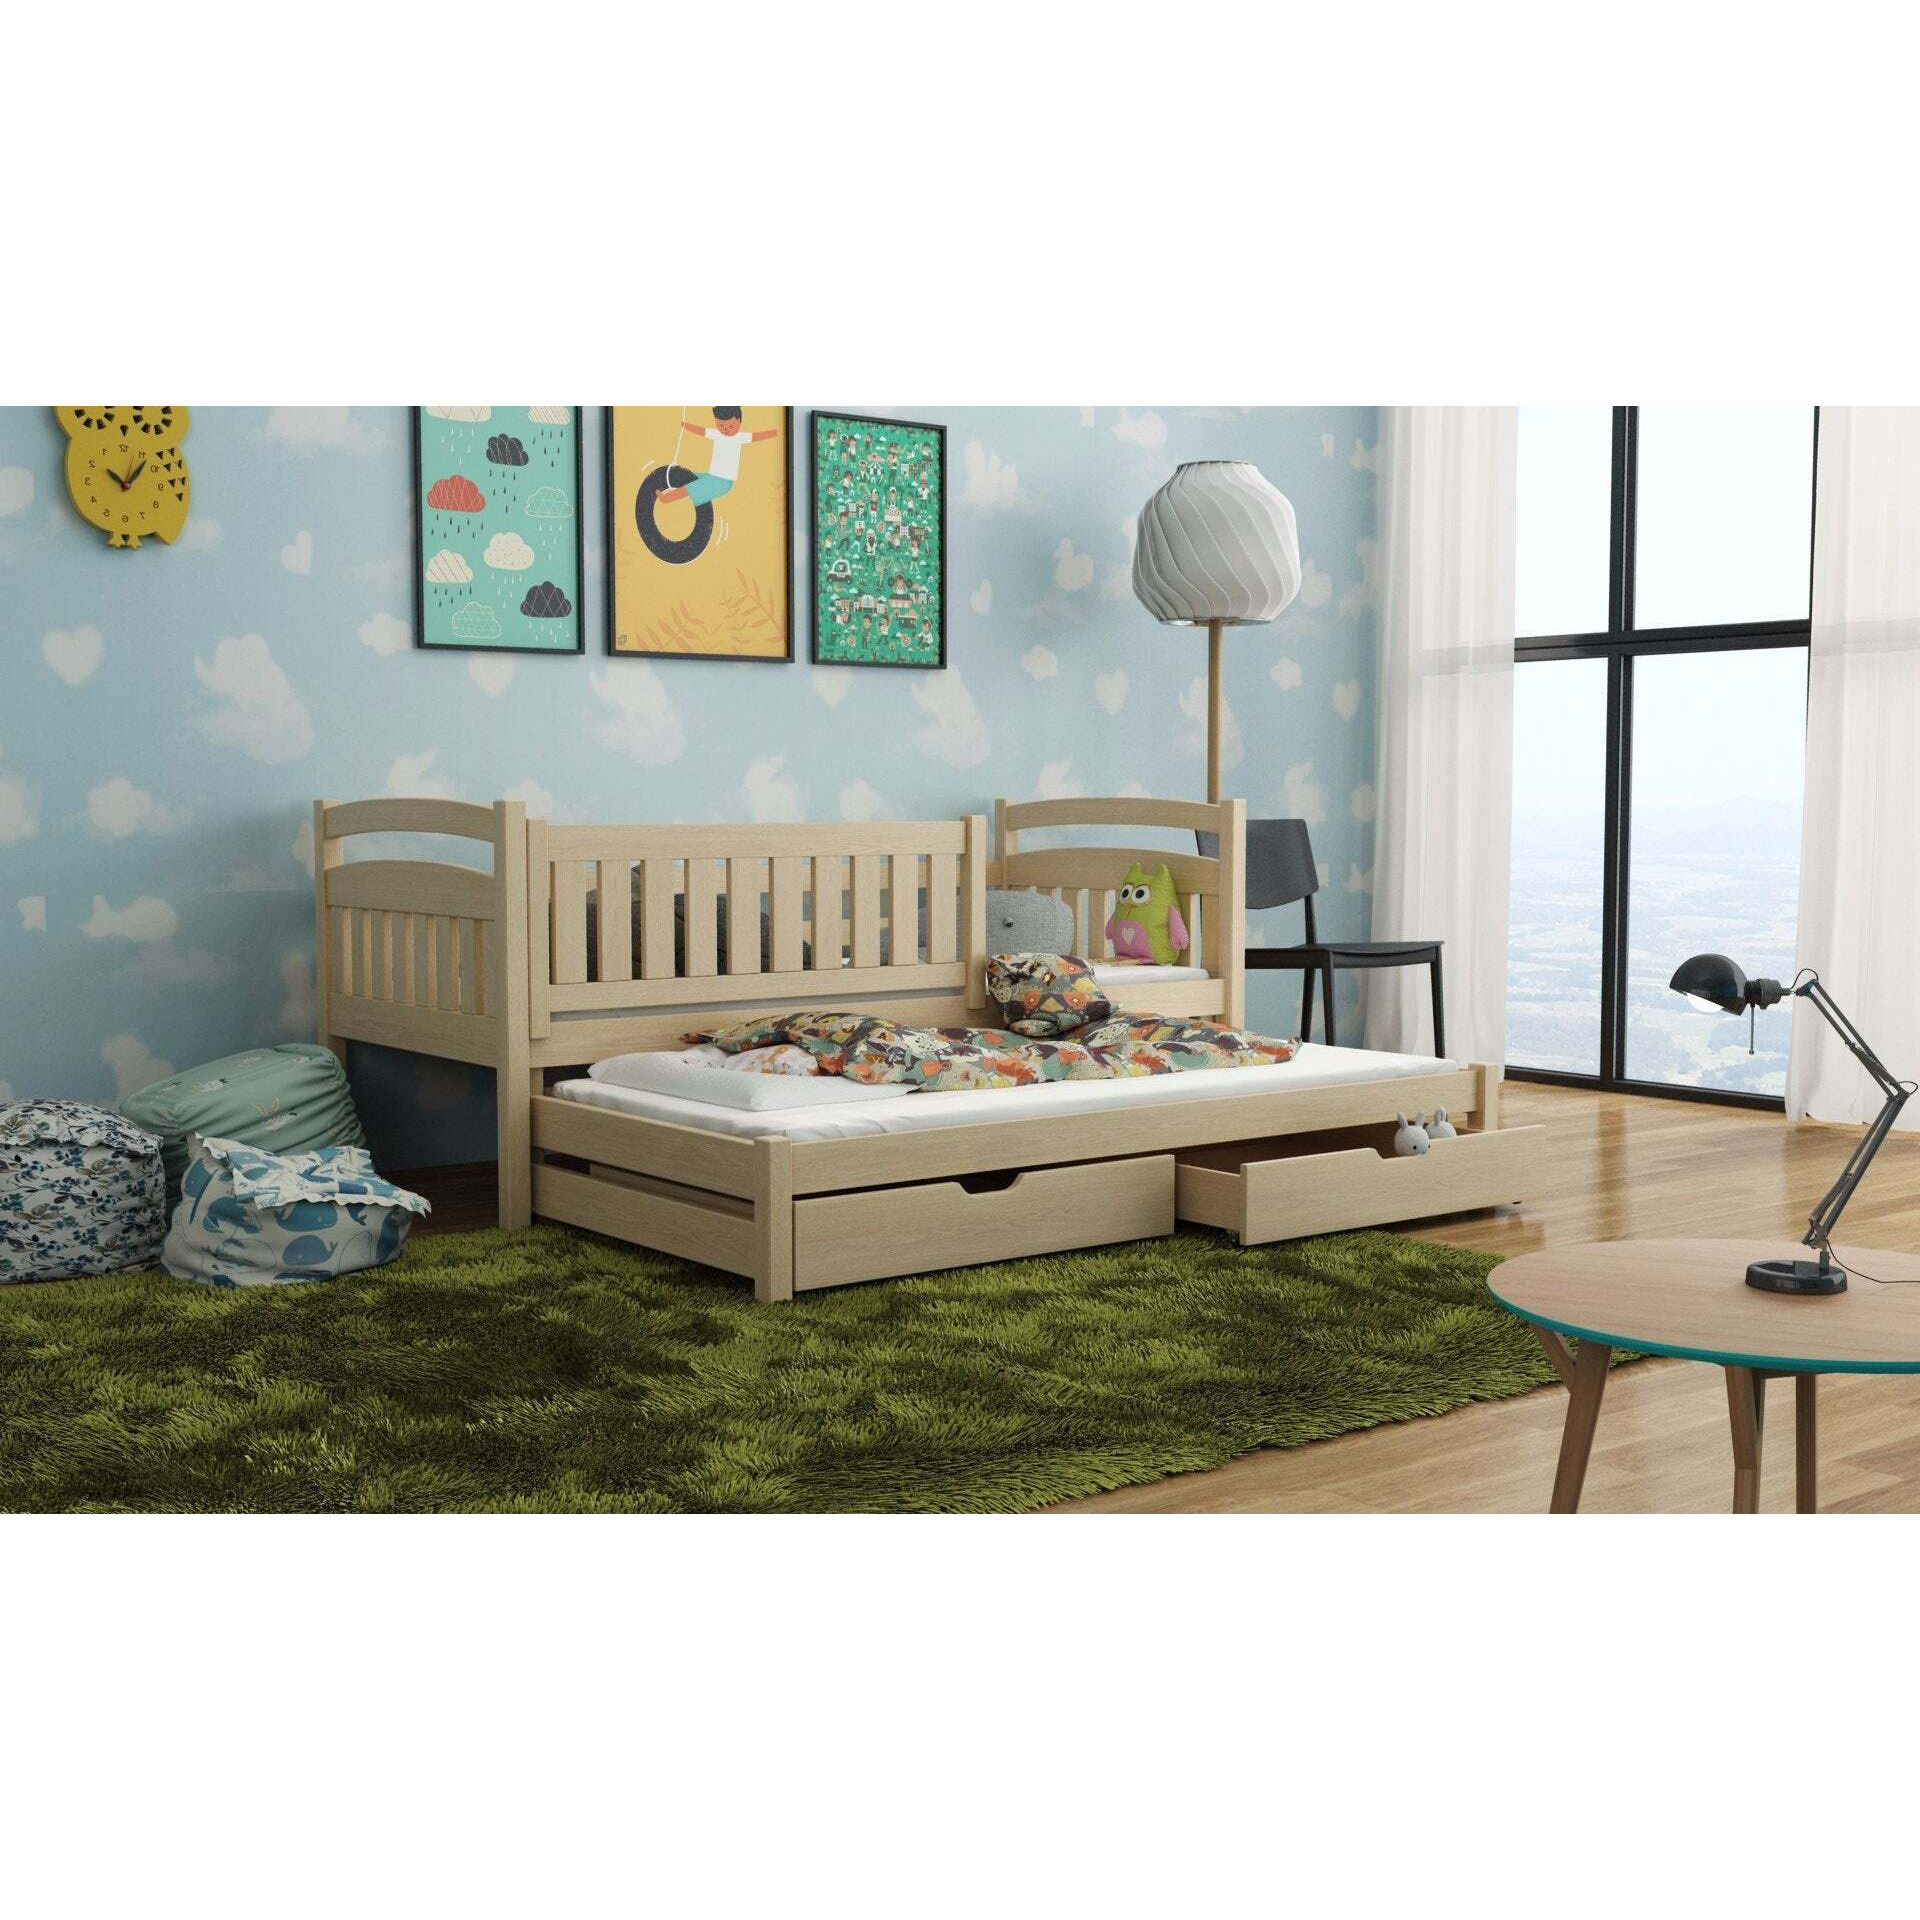 Galaxy Bed with Trundle and Storage - Pine Without Mattresses - image 1